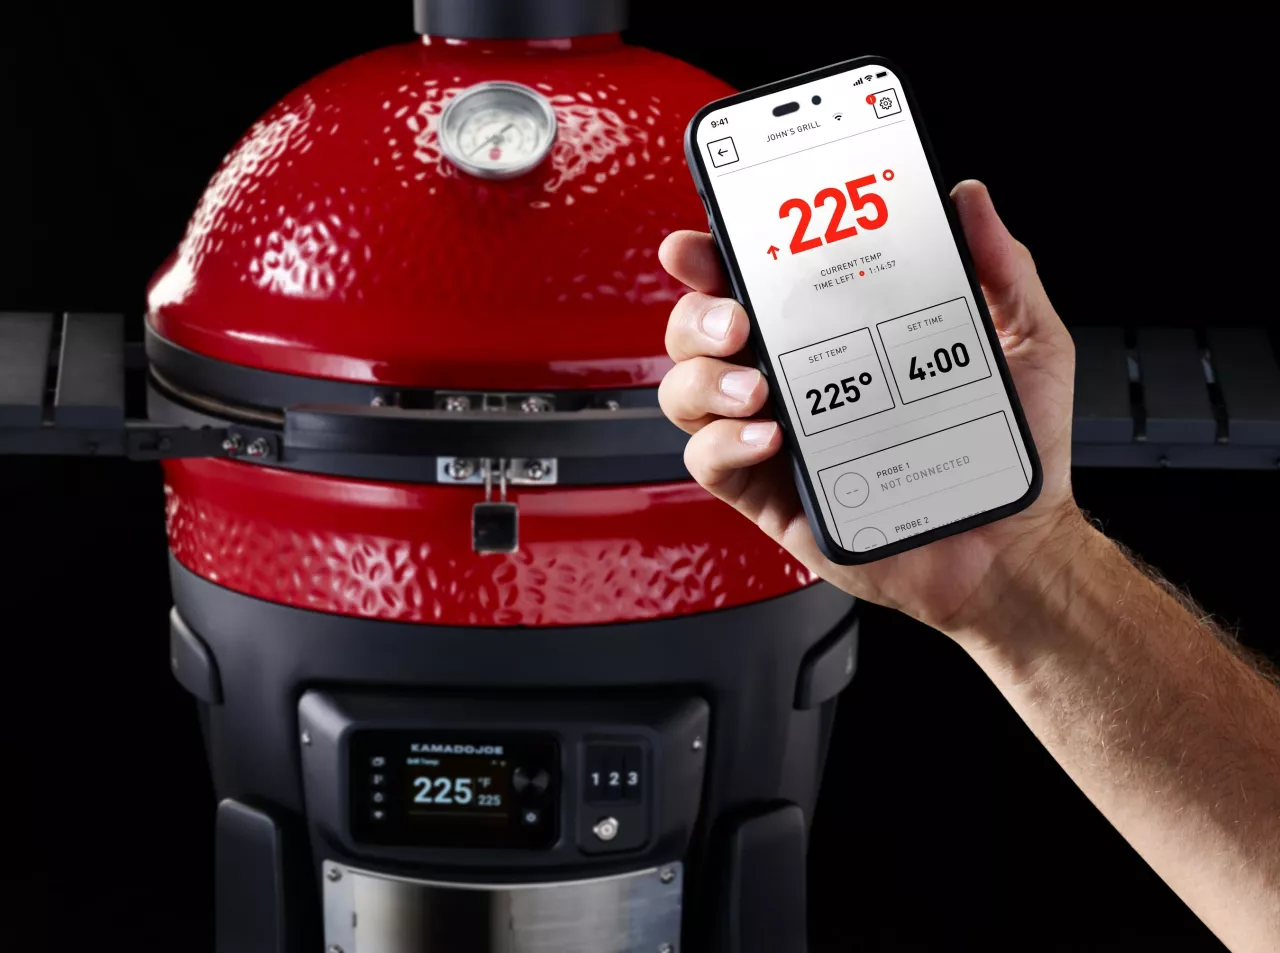 The digital controls and convenient app-enabled features of the Konnected Joe help grillers experience the benefits of kamado cooking with greater ease of use in lighting the charcoal and maintaining desired grill temperature. img#2